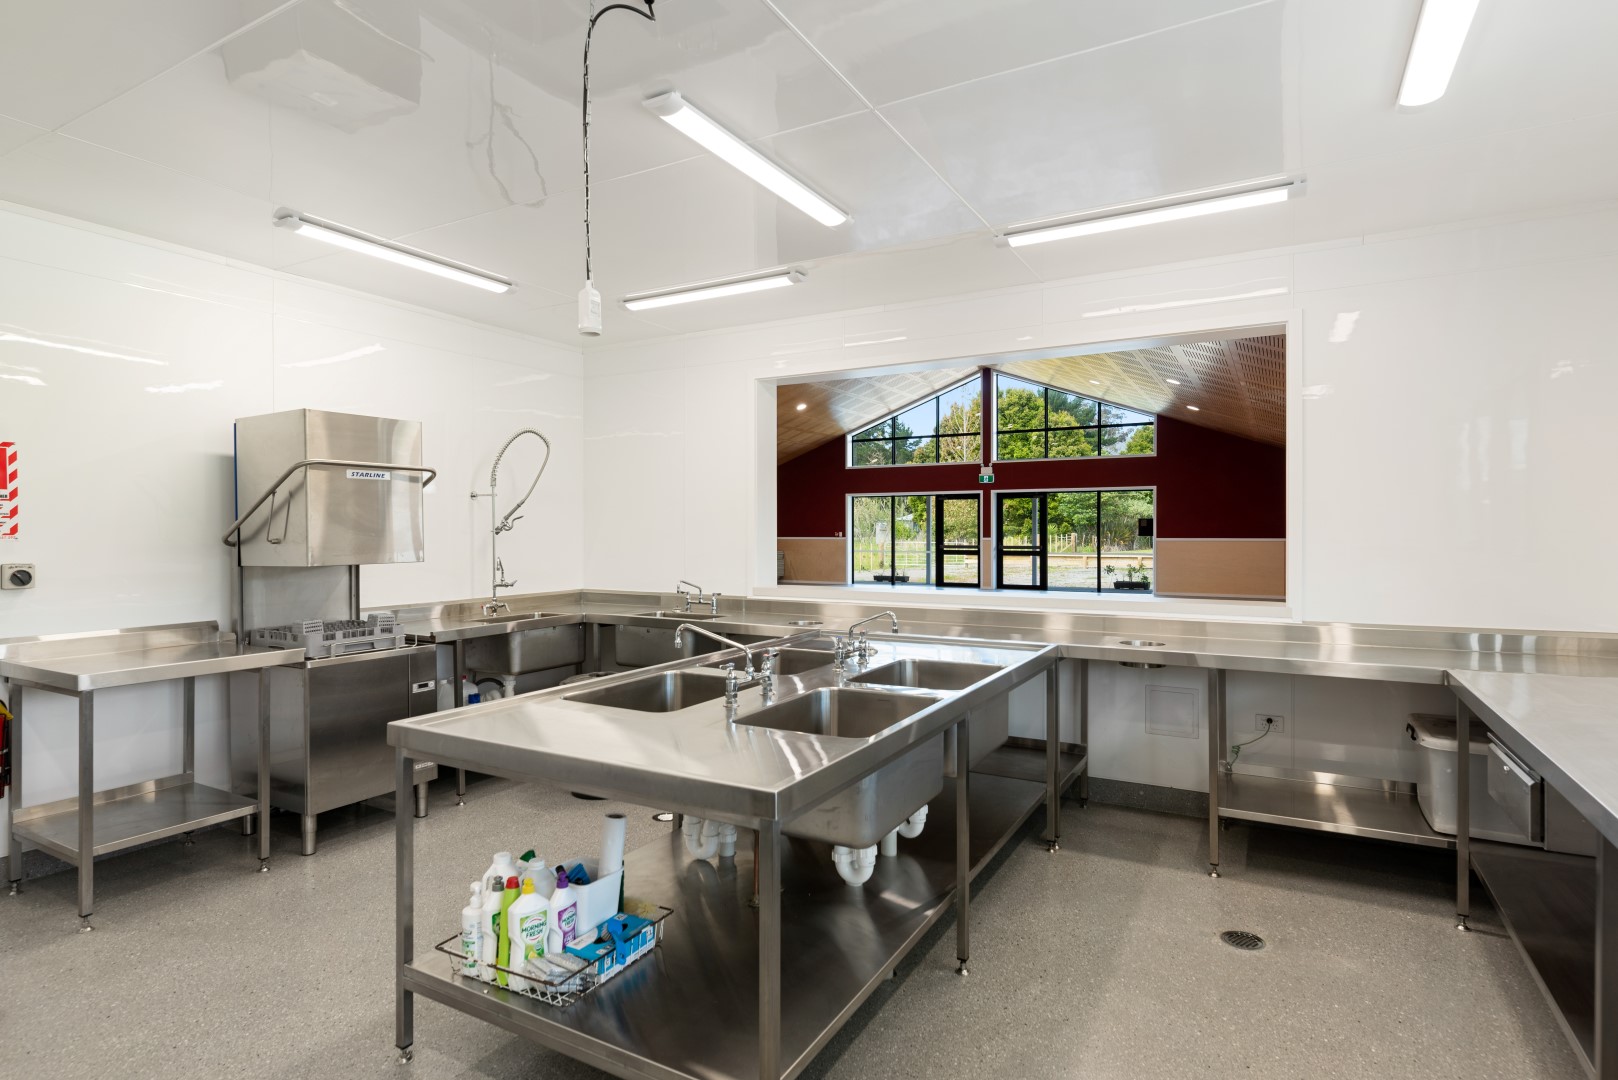 otatara-marae-commercial-kitchen-chiller-stainless-steel-benches-wash-down-arcline-architecture